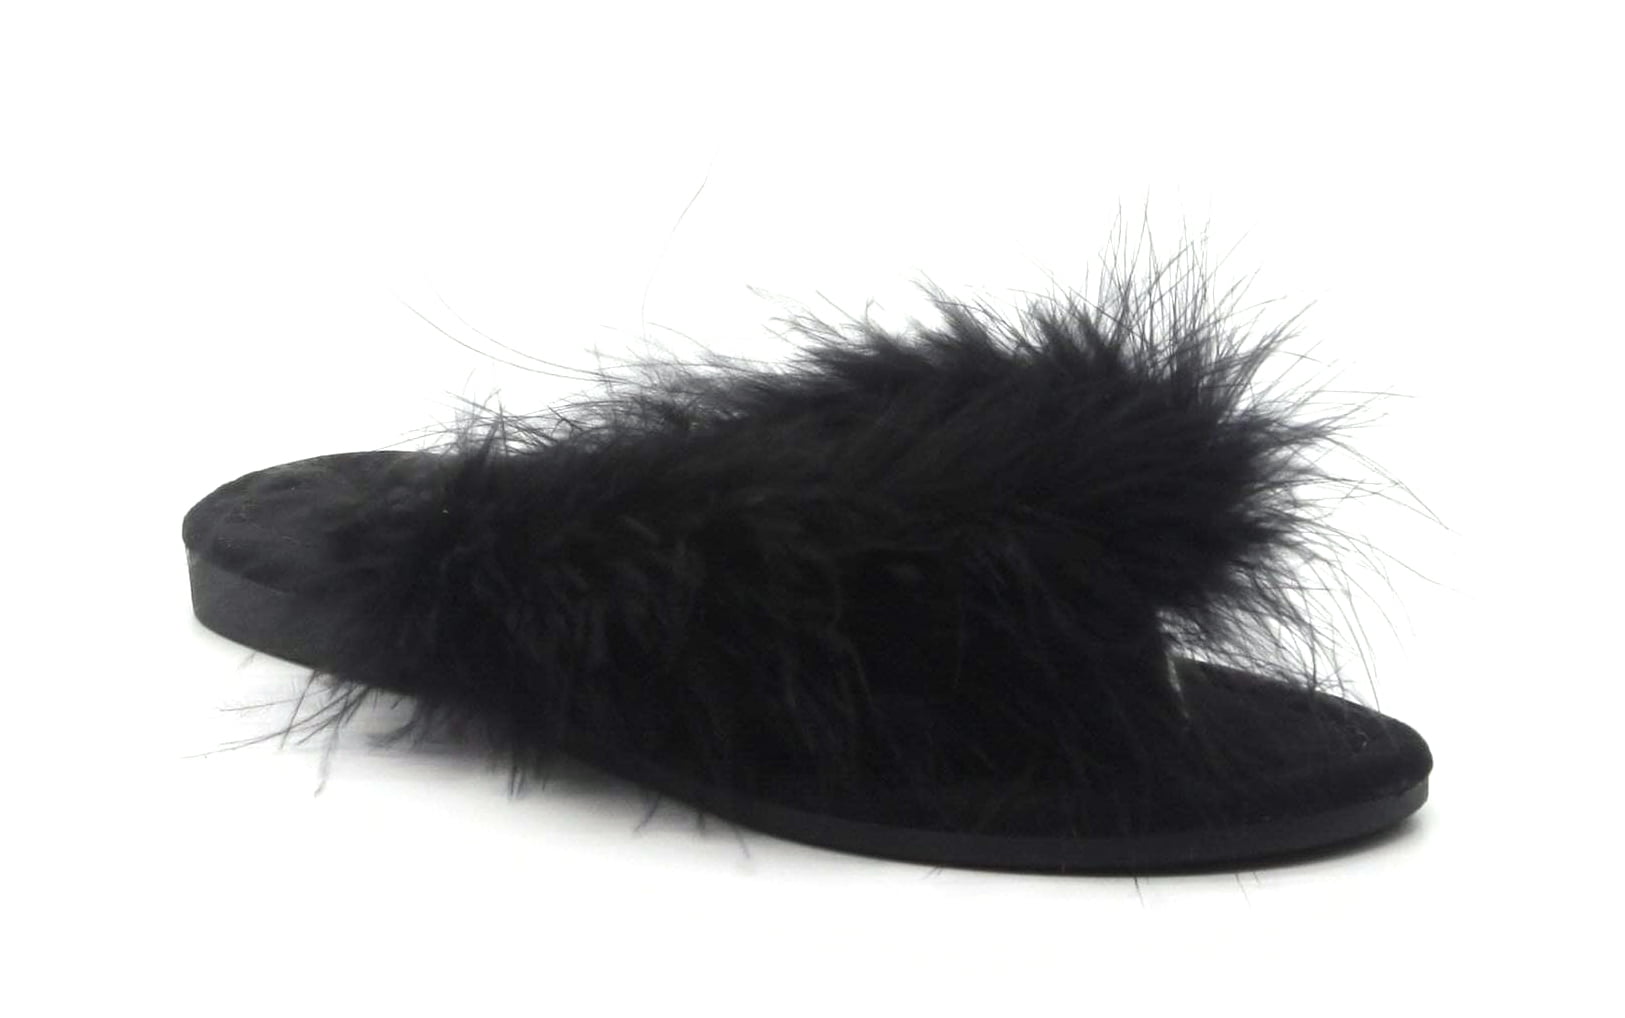 Cape Robbin Gale Nude Feather Furry Flat Thong Flip Flop Fashion Slide Sandals